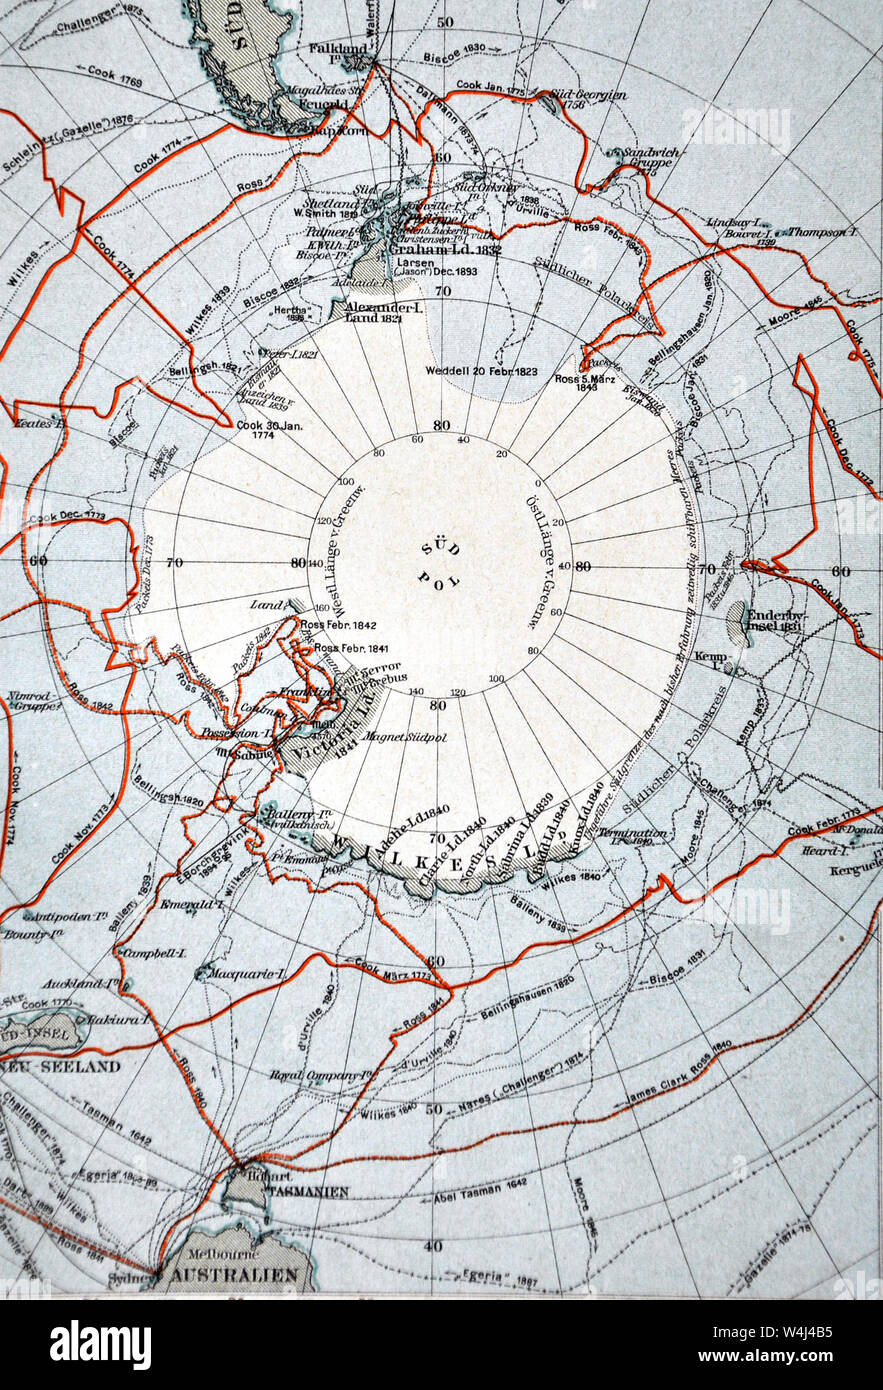 1900 Meyer Map of Antarctica Showing Early Exploration Routes Stock Photo